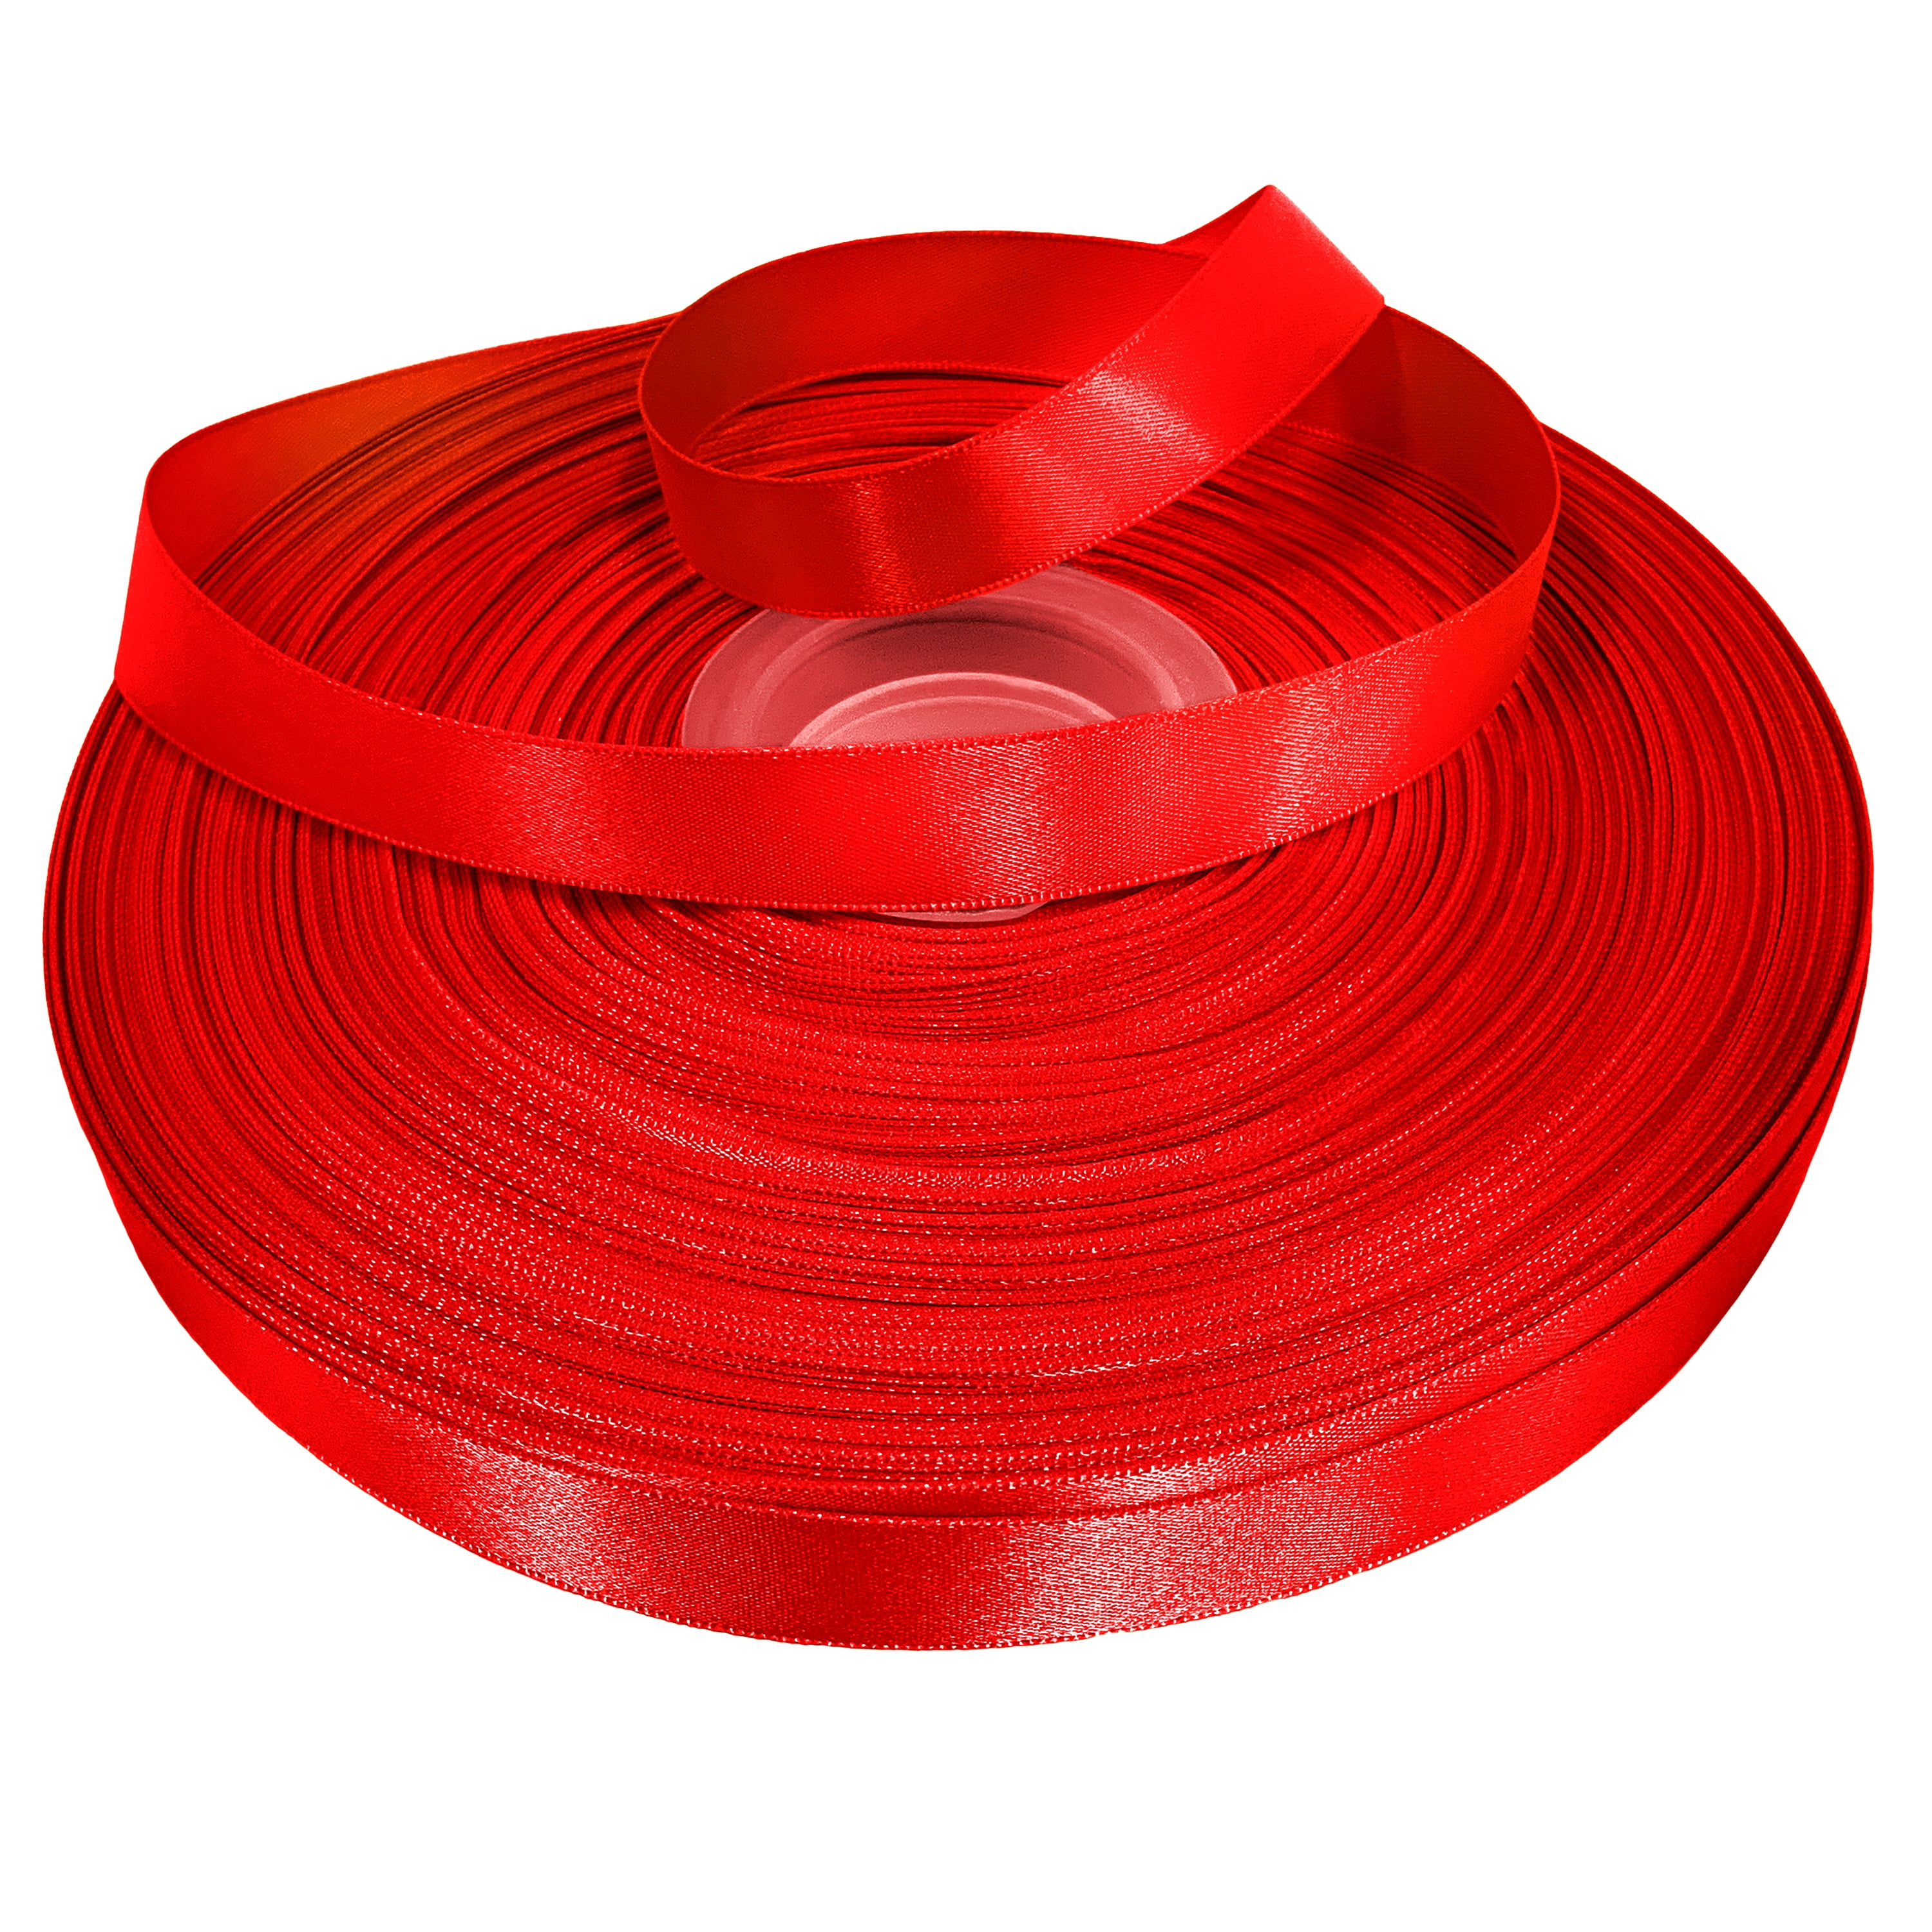  Topenca Supplies Red Satin Ribbon 1 Inch & 50 Yards - Super  Soft Red Ribbon for Gift Wrapping - Make Beautiful Decorations with Our  Durable and Thick Ribbon - Double Faced Ribbon Roll